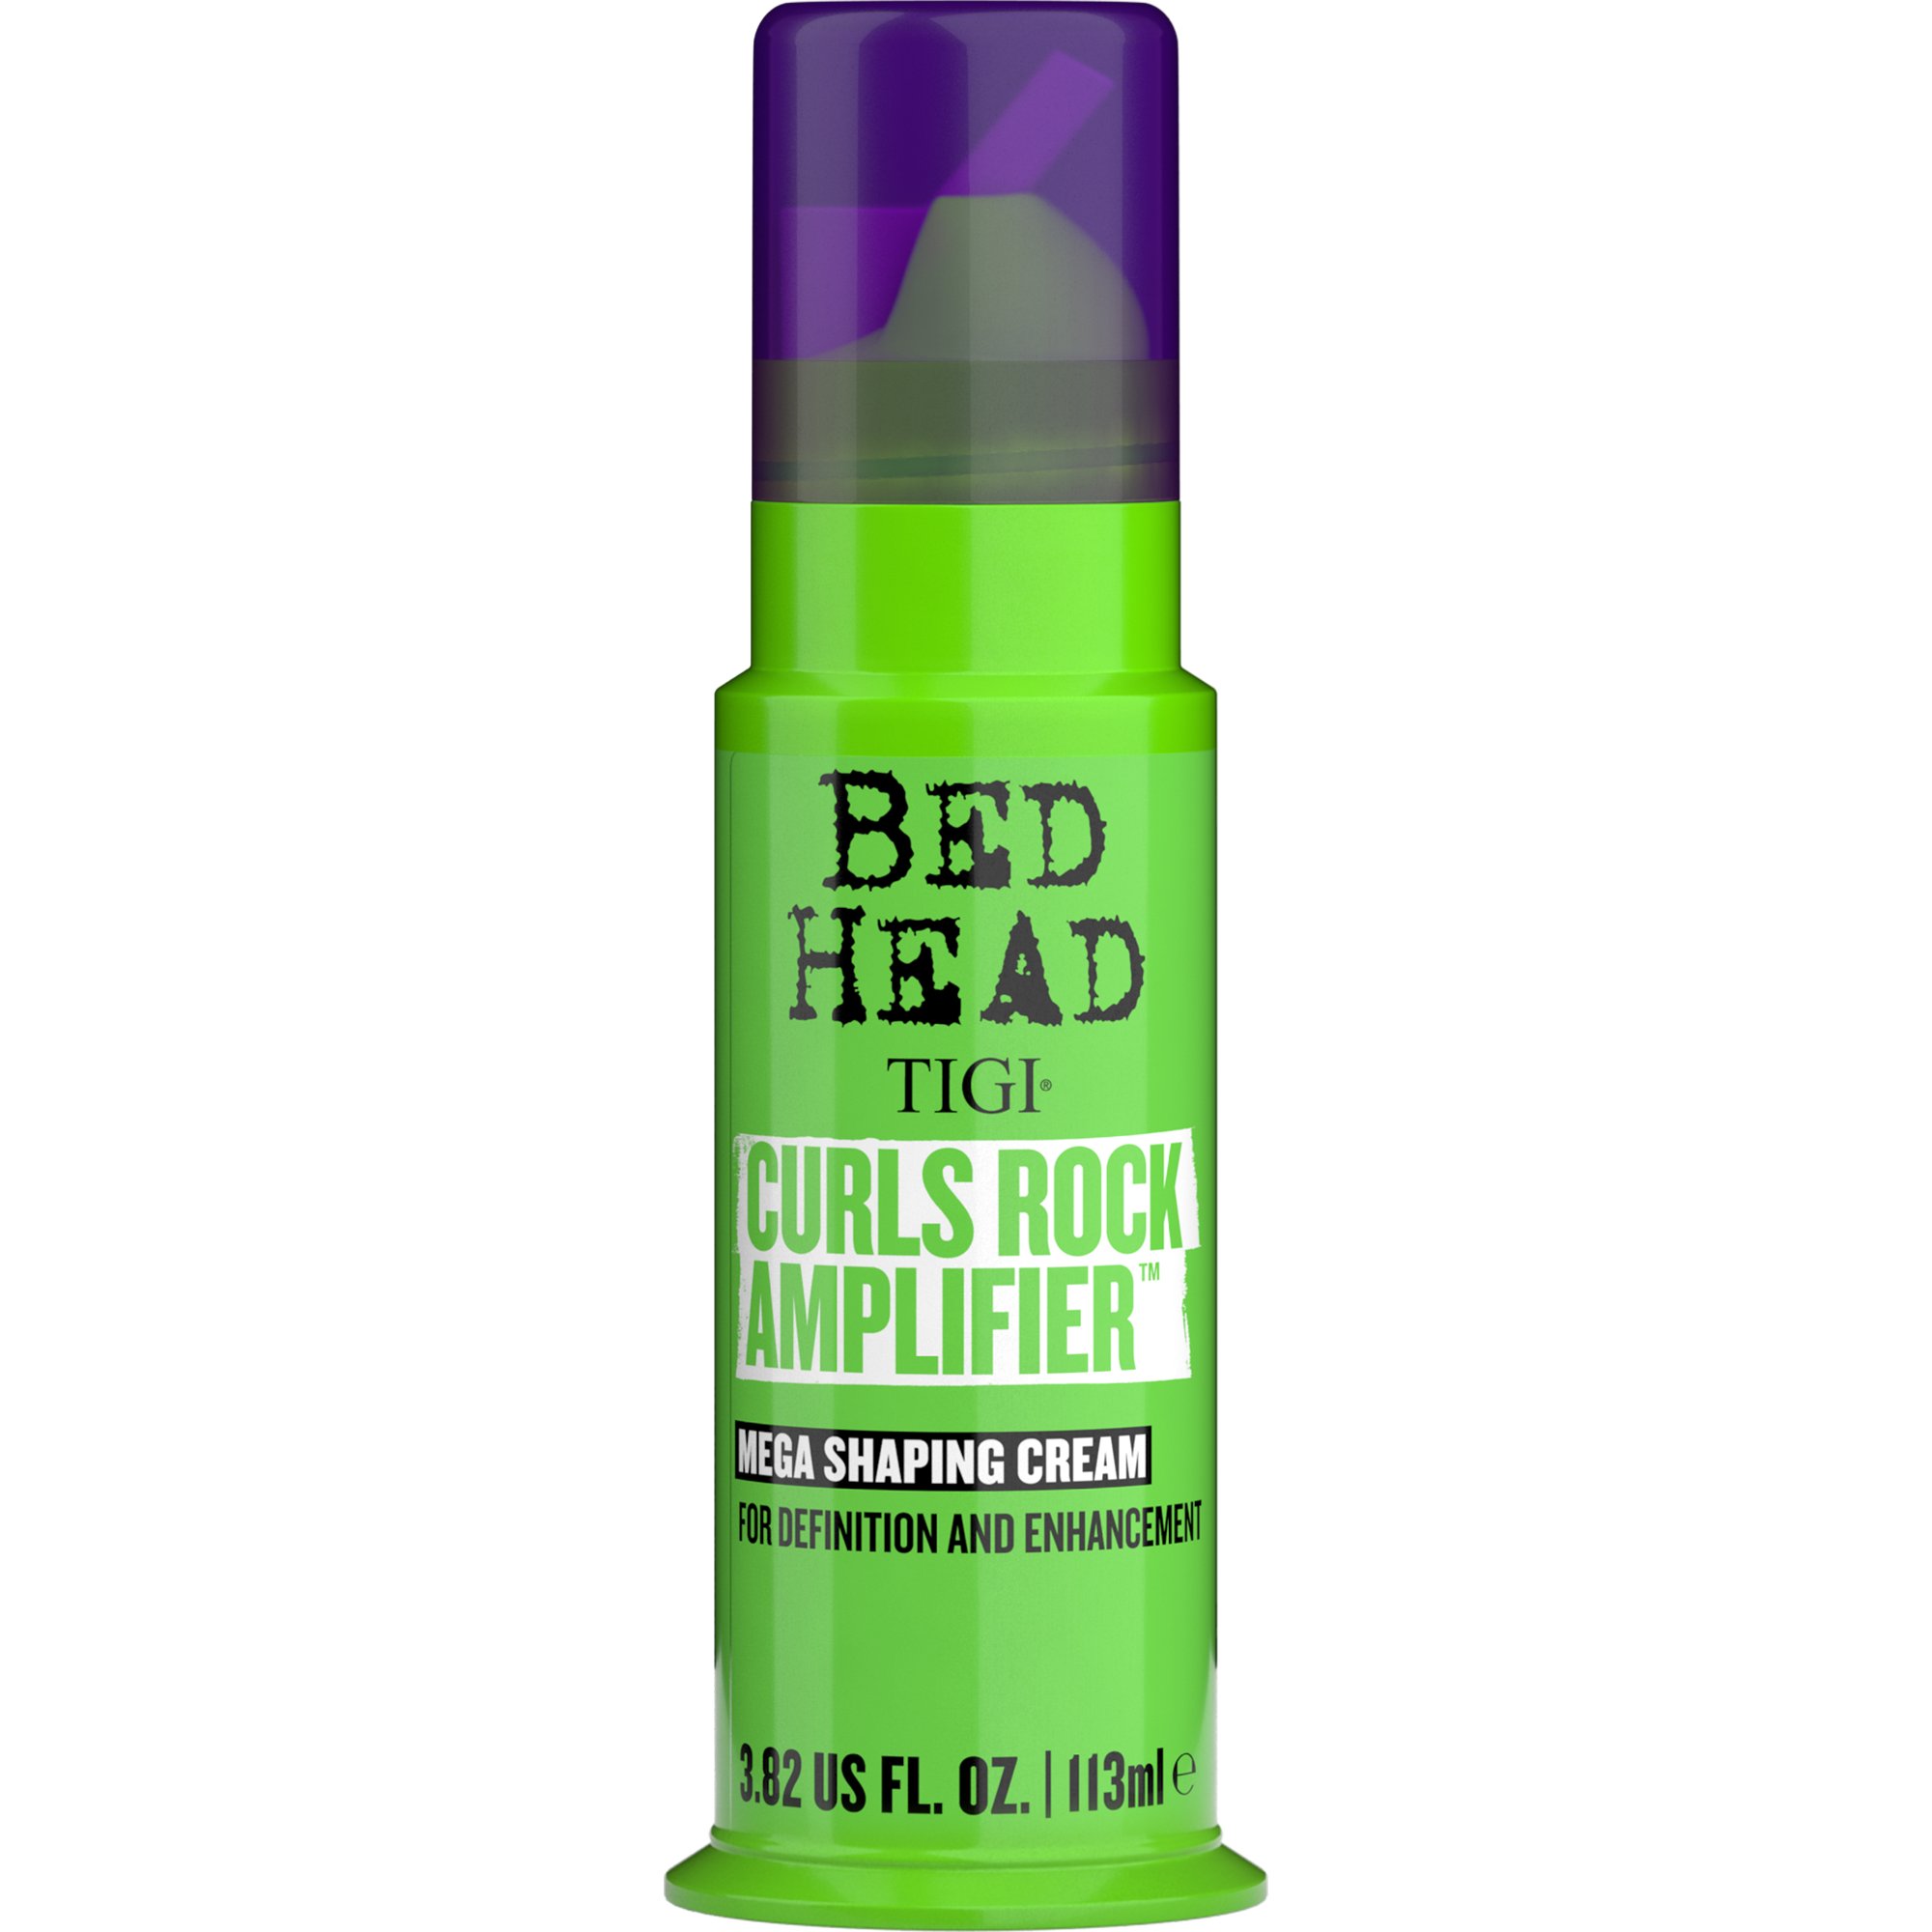 genvinde Sump automat Bed Head by TIGI Curls Rock Amplifier Curly Hair Cream for Defined Curls -  Shop Hair Care at H-E-B